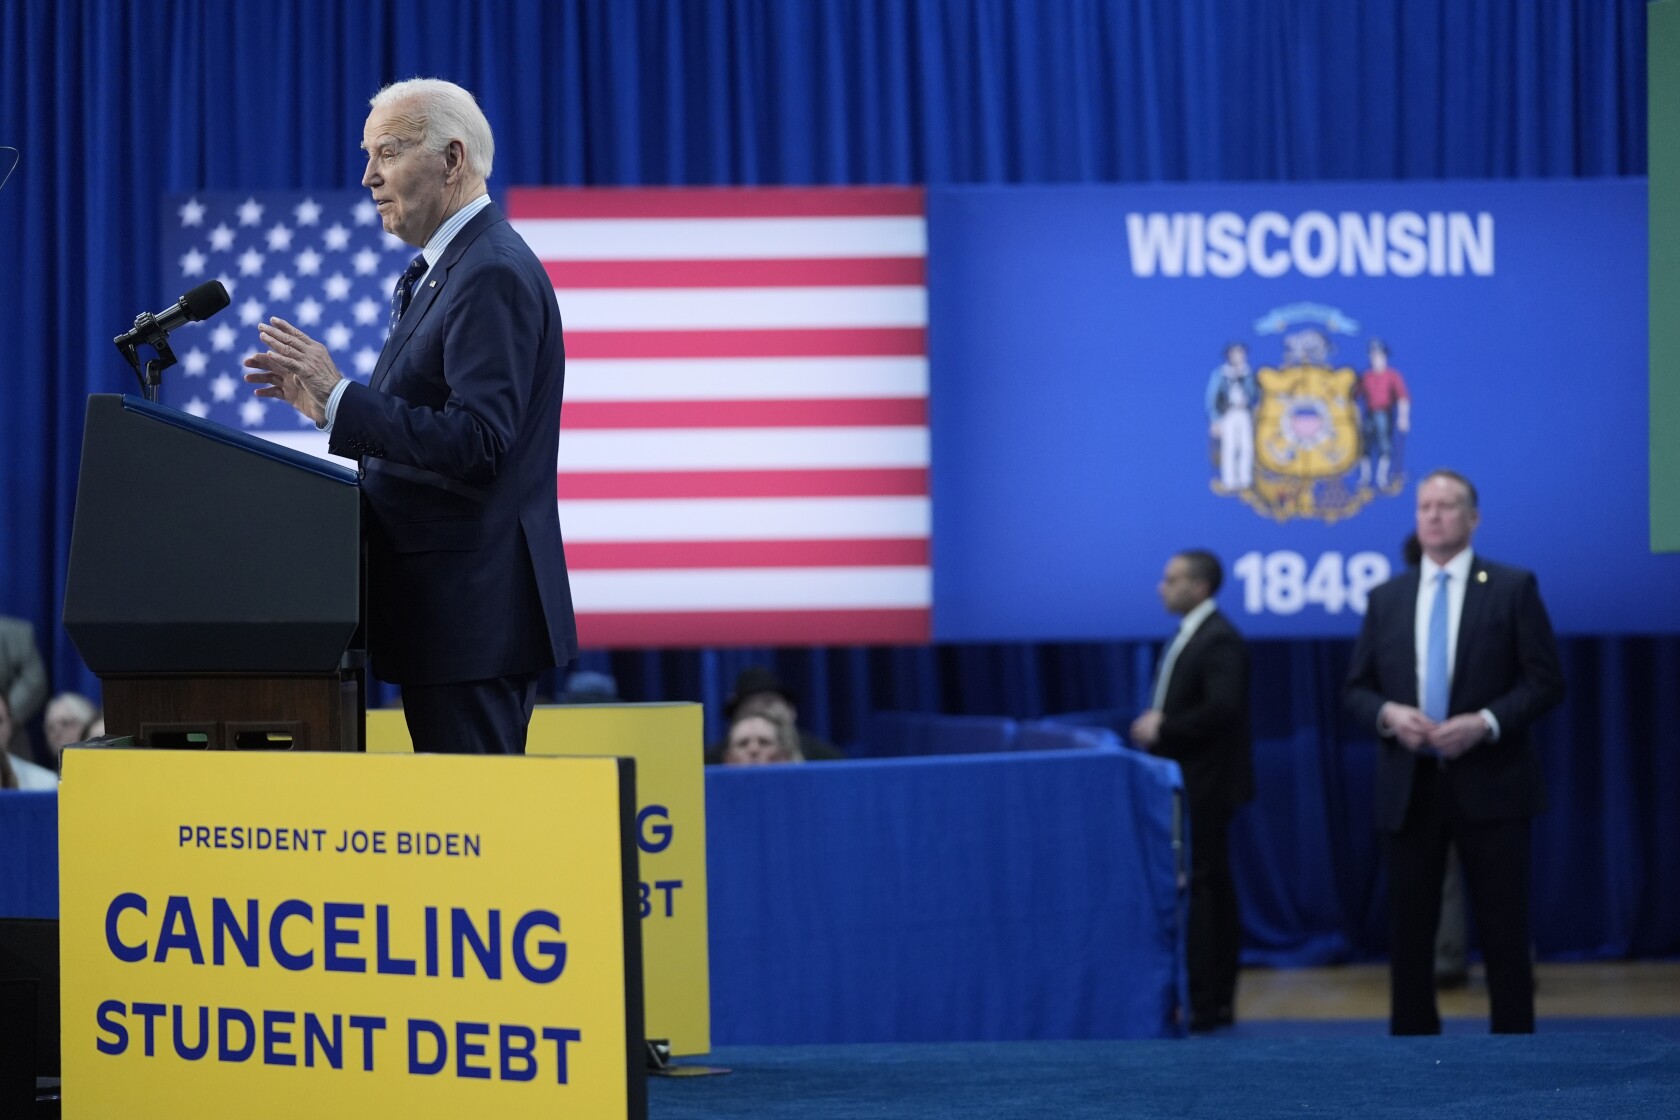 President Biden pitches student loan relief in Wisconsin, then heads to Chicago to fundraise